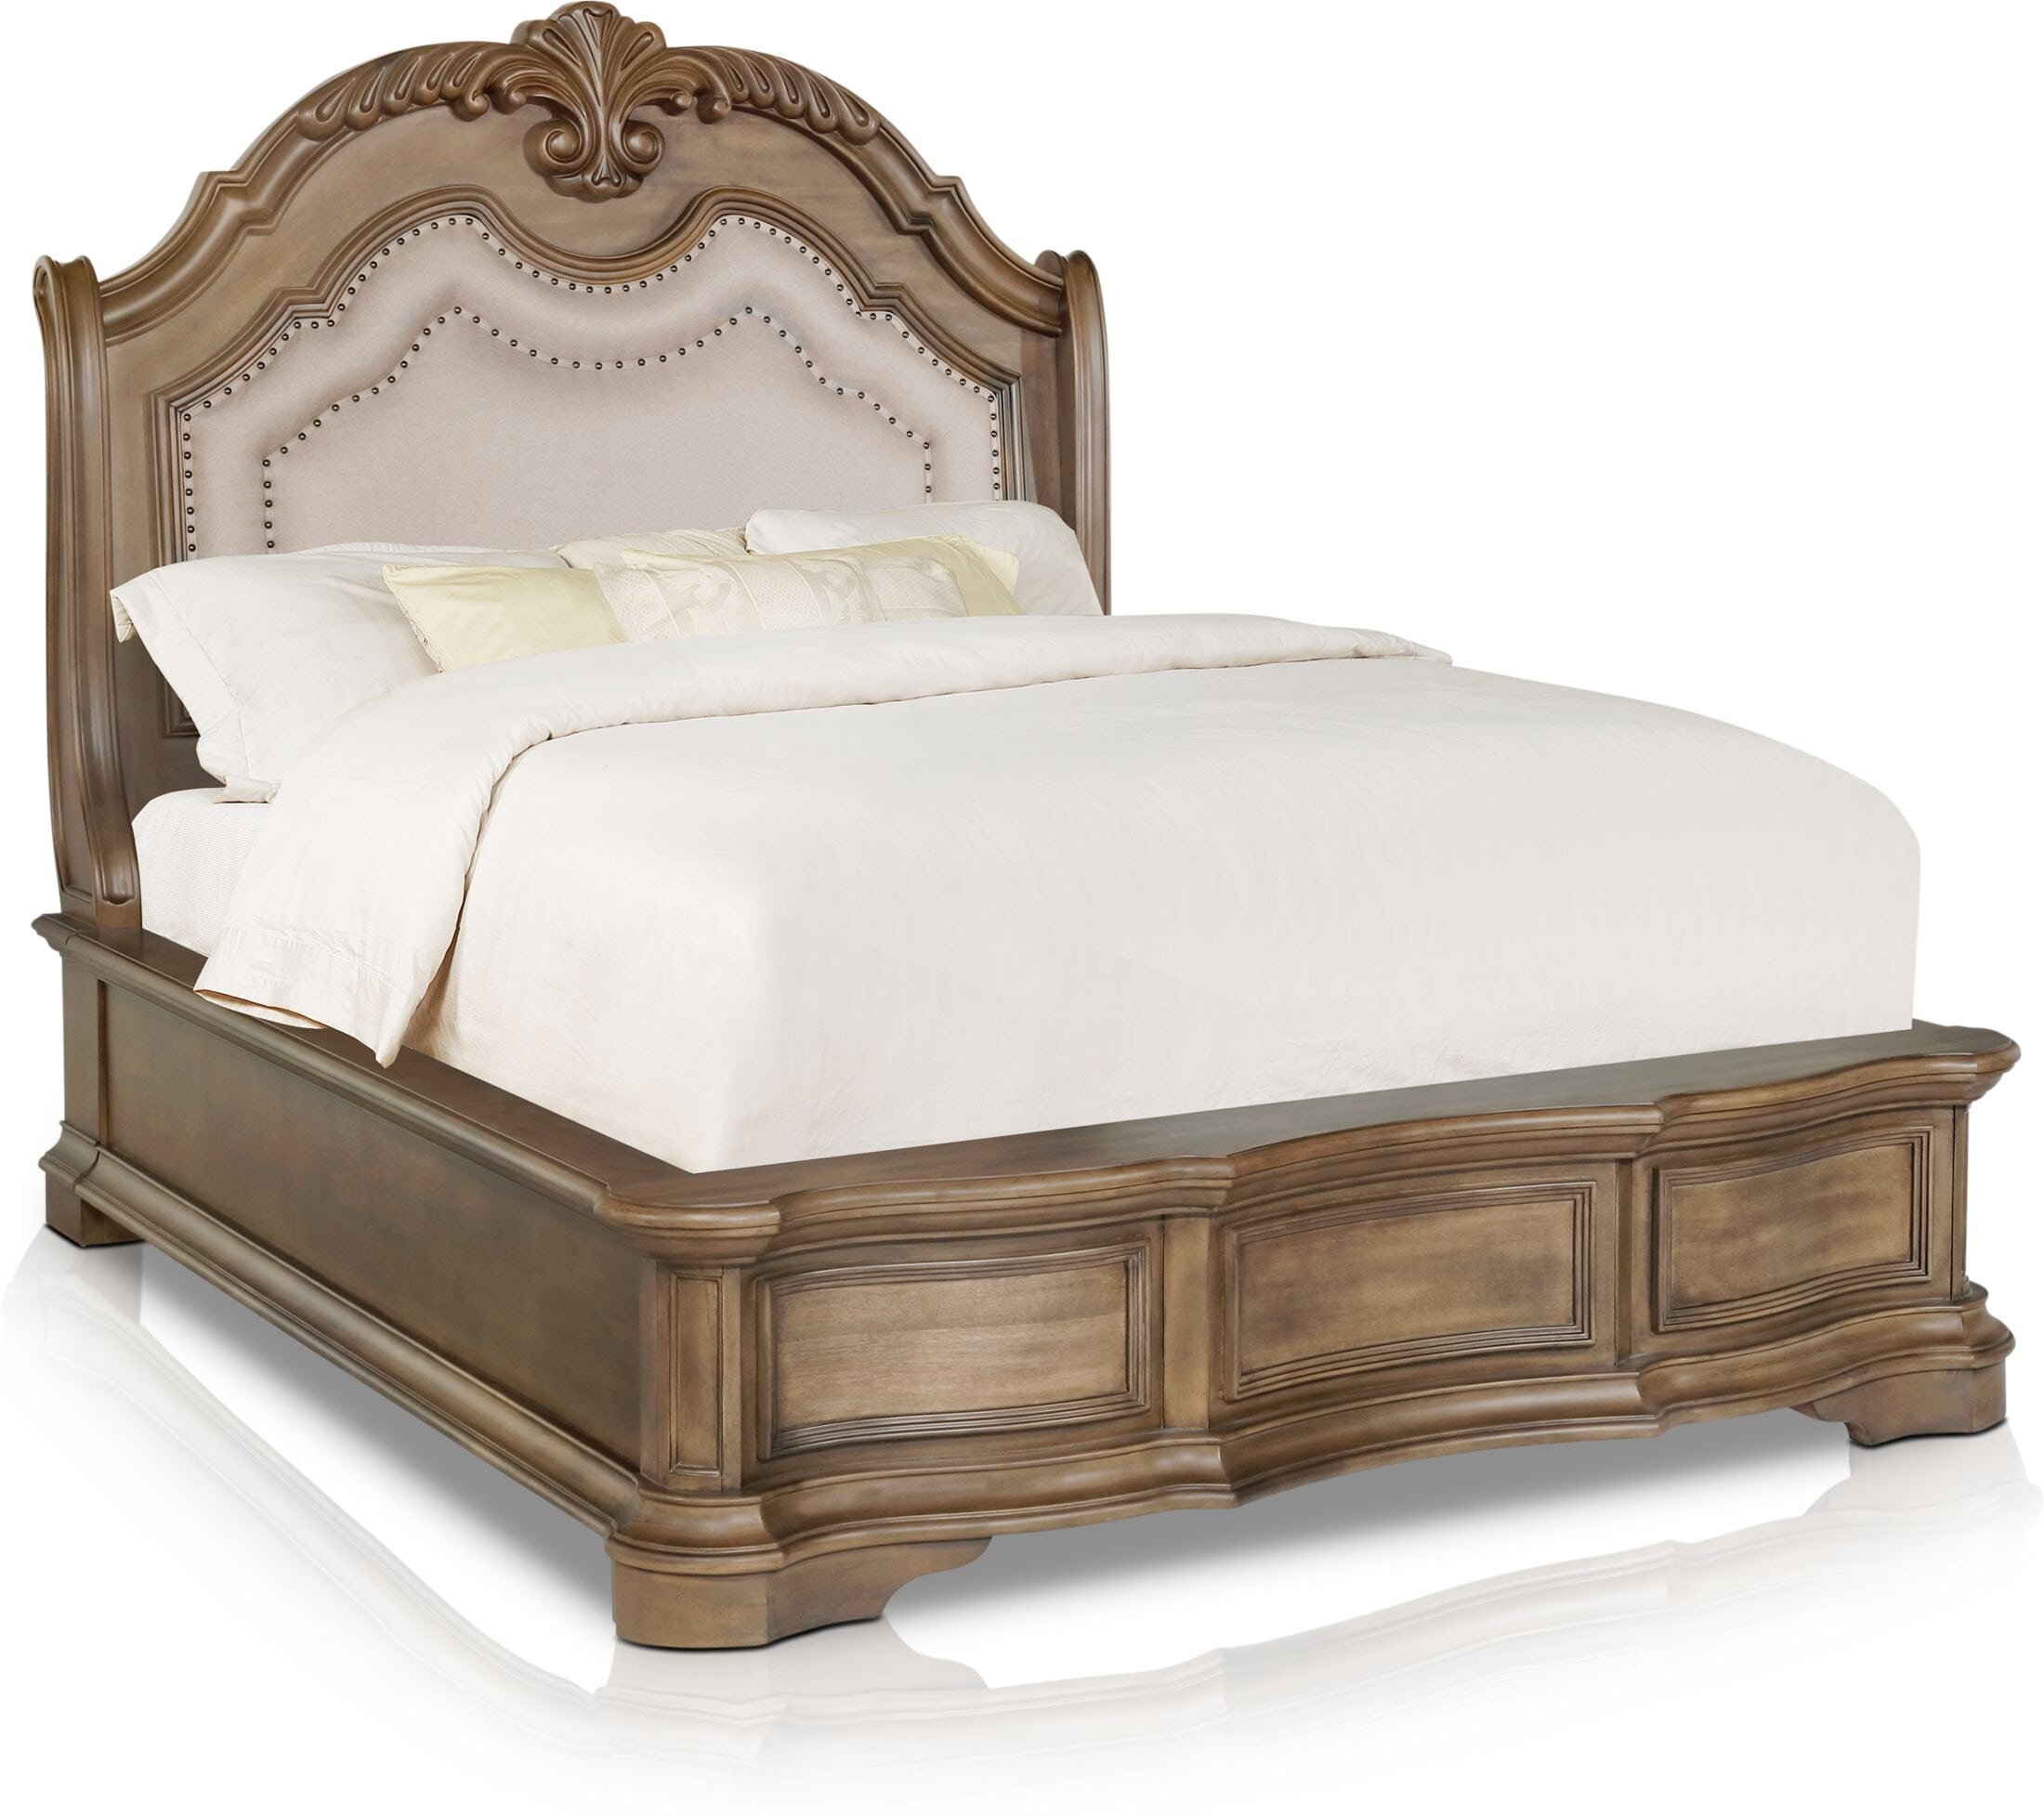 Gramercy Park Bed American Signature, American King Bed